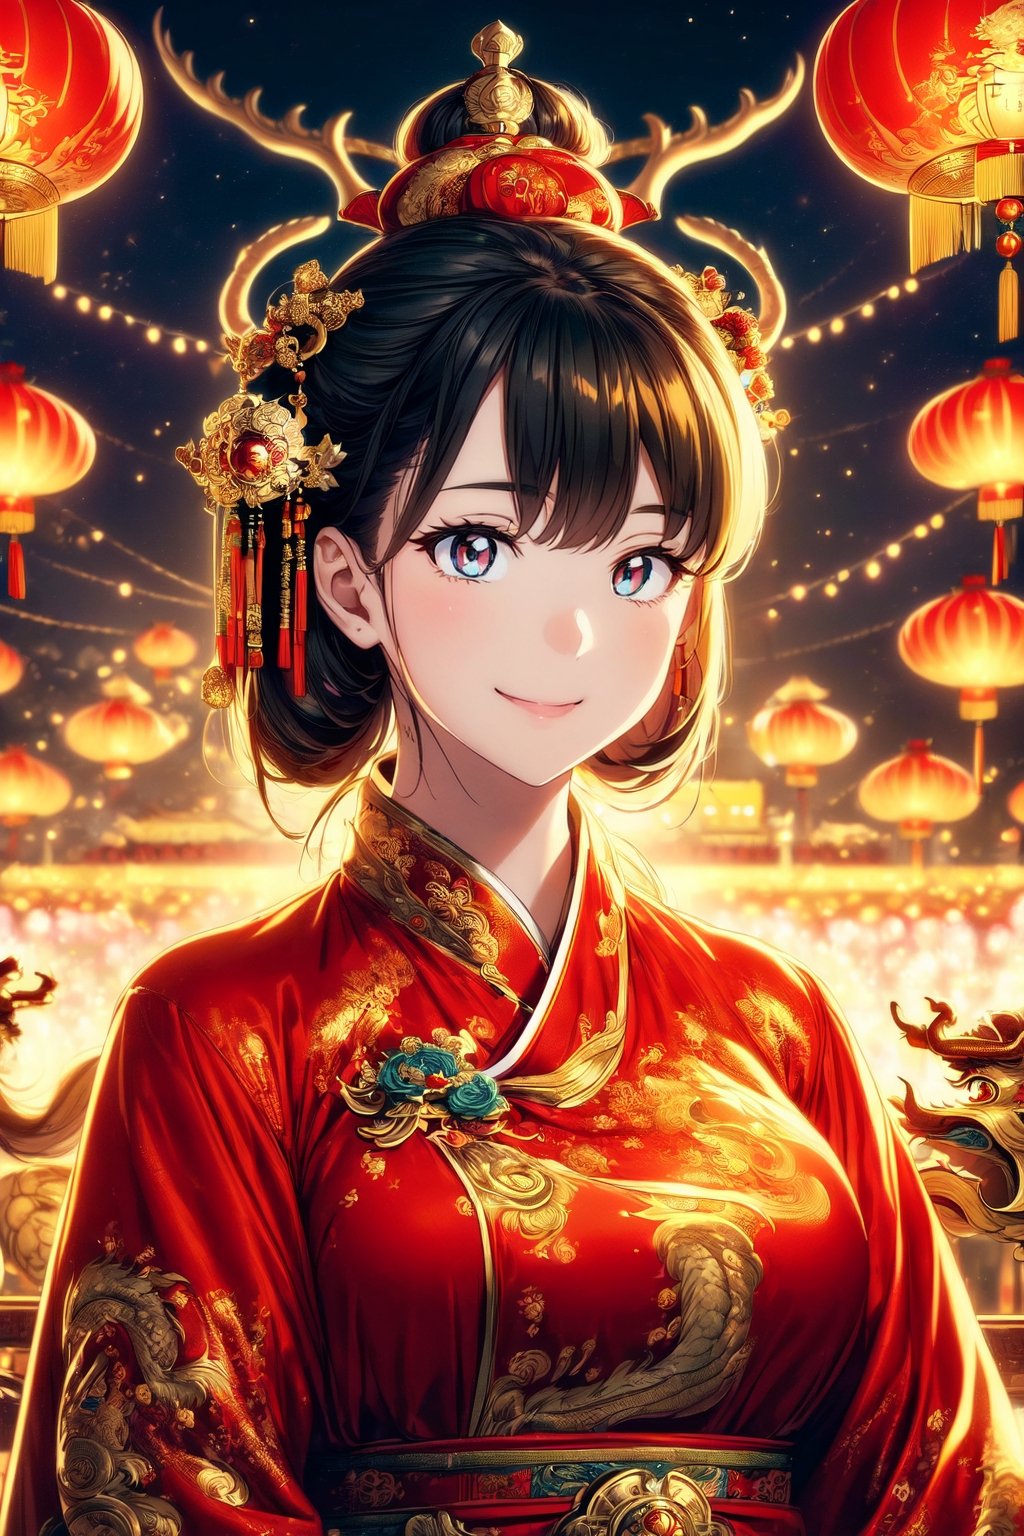 (masterpiece, high quality:1.5), Vibrant, detailed, high-resolution, artistic, majestic, magnificent, elaborate detail, awe-inspiring, splendid, celebratory, 
1 girl, China Tang Dynasty costumes, elegant, traditional, culturally rich, 
night sky, grand fireworks display, glowing red lanterns, cultural heritage, festive atmosphere, ancient cityscape, traditional architecture, 
(Giant golden dragon:1.2), flying dragon in the sky, large, majestic, overwhelming presence, by FuturEvoLab, historical, mythical, dynamic, visually striking, Exquisite face,1 girl,More Detail,Oiran,Exquisite face